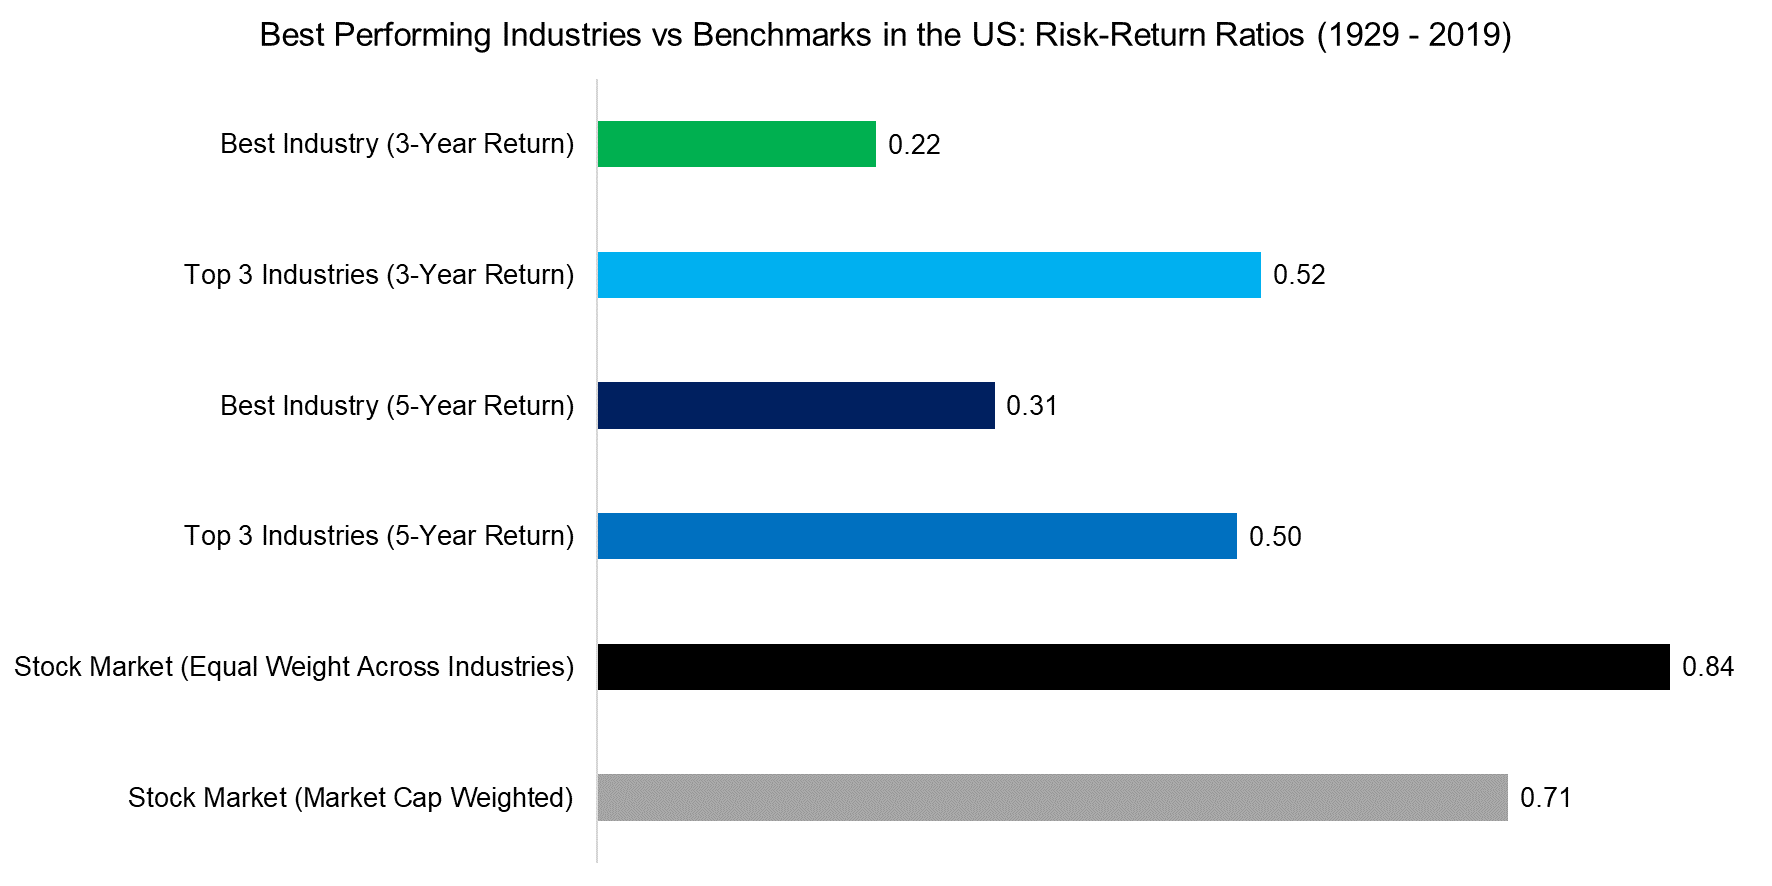 Best Performing Industries vs Benchmarks in the US Risk-Return Ratios (1929